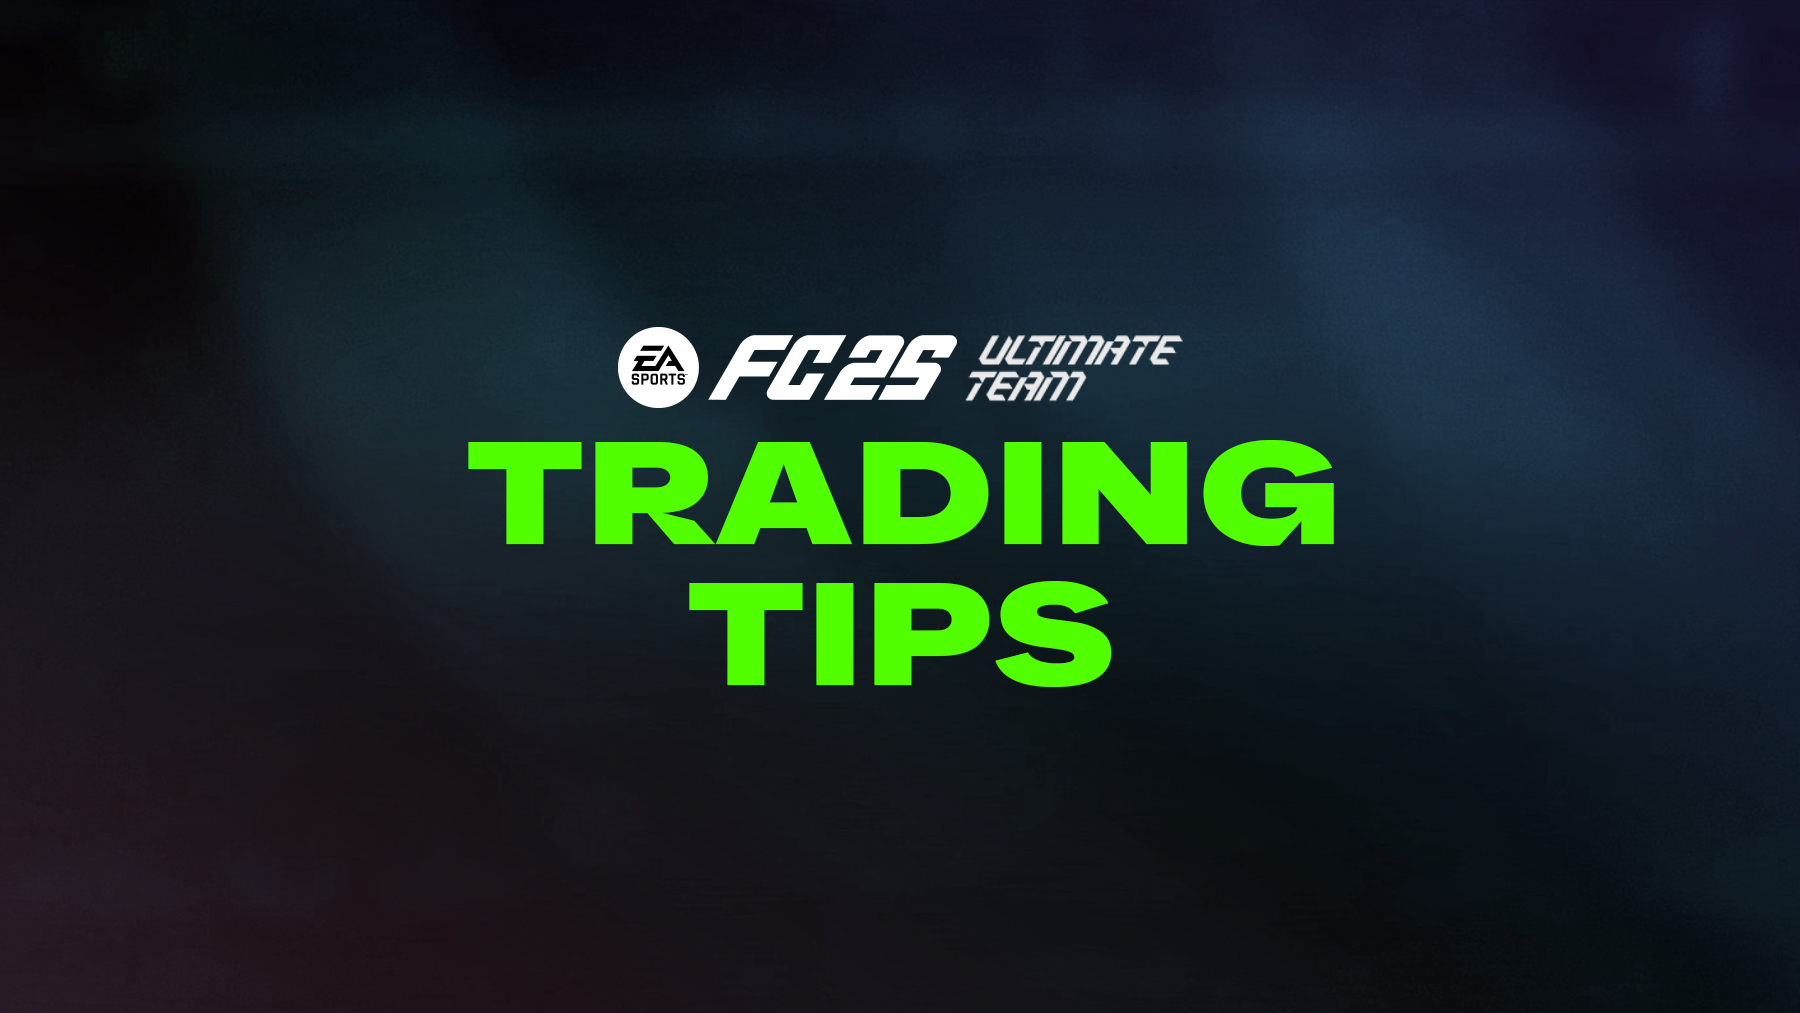 Trading is critical for the FC 25 Ultimate Team. If you know how to trade successfully, you can earn coins and buy valuable items in FUT.